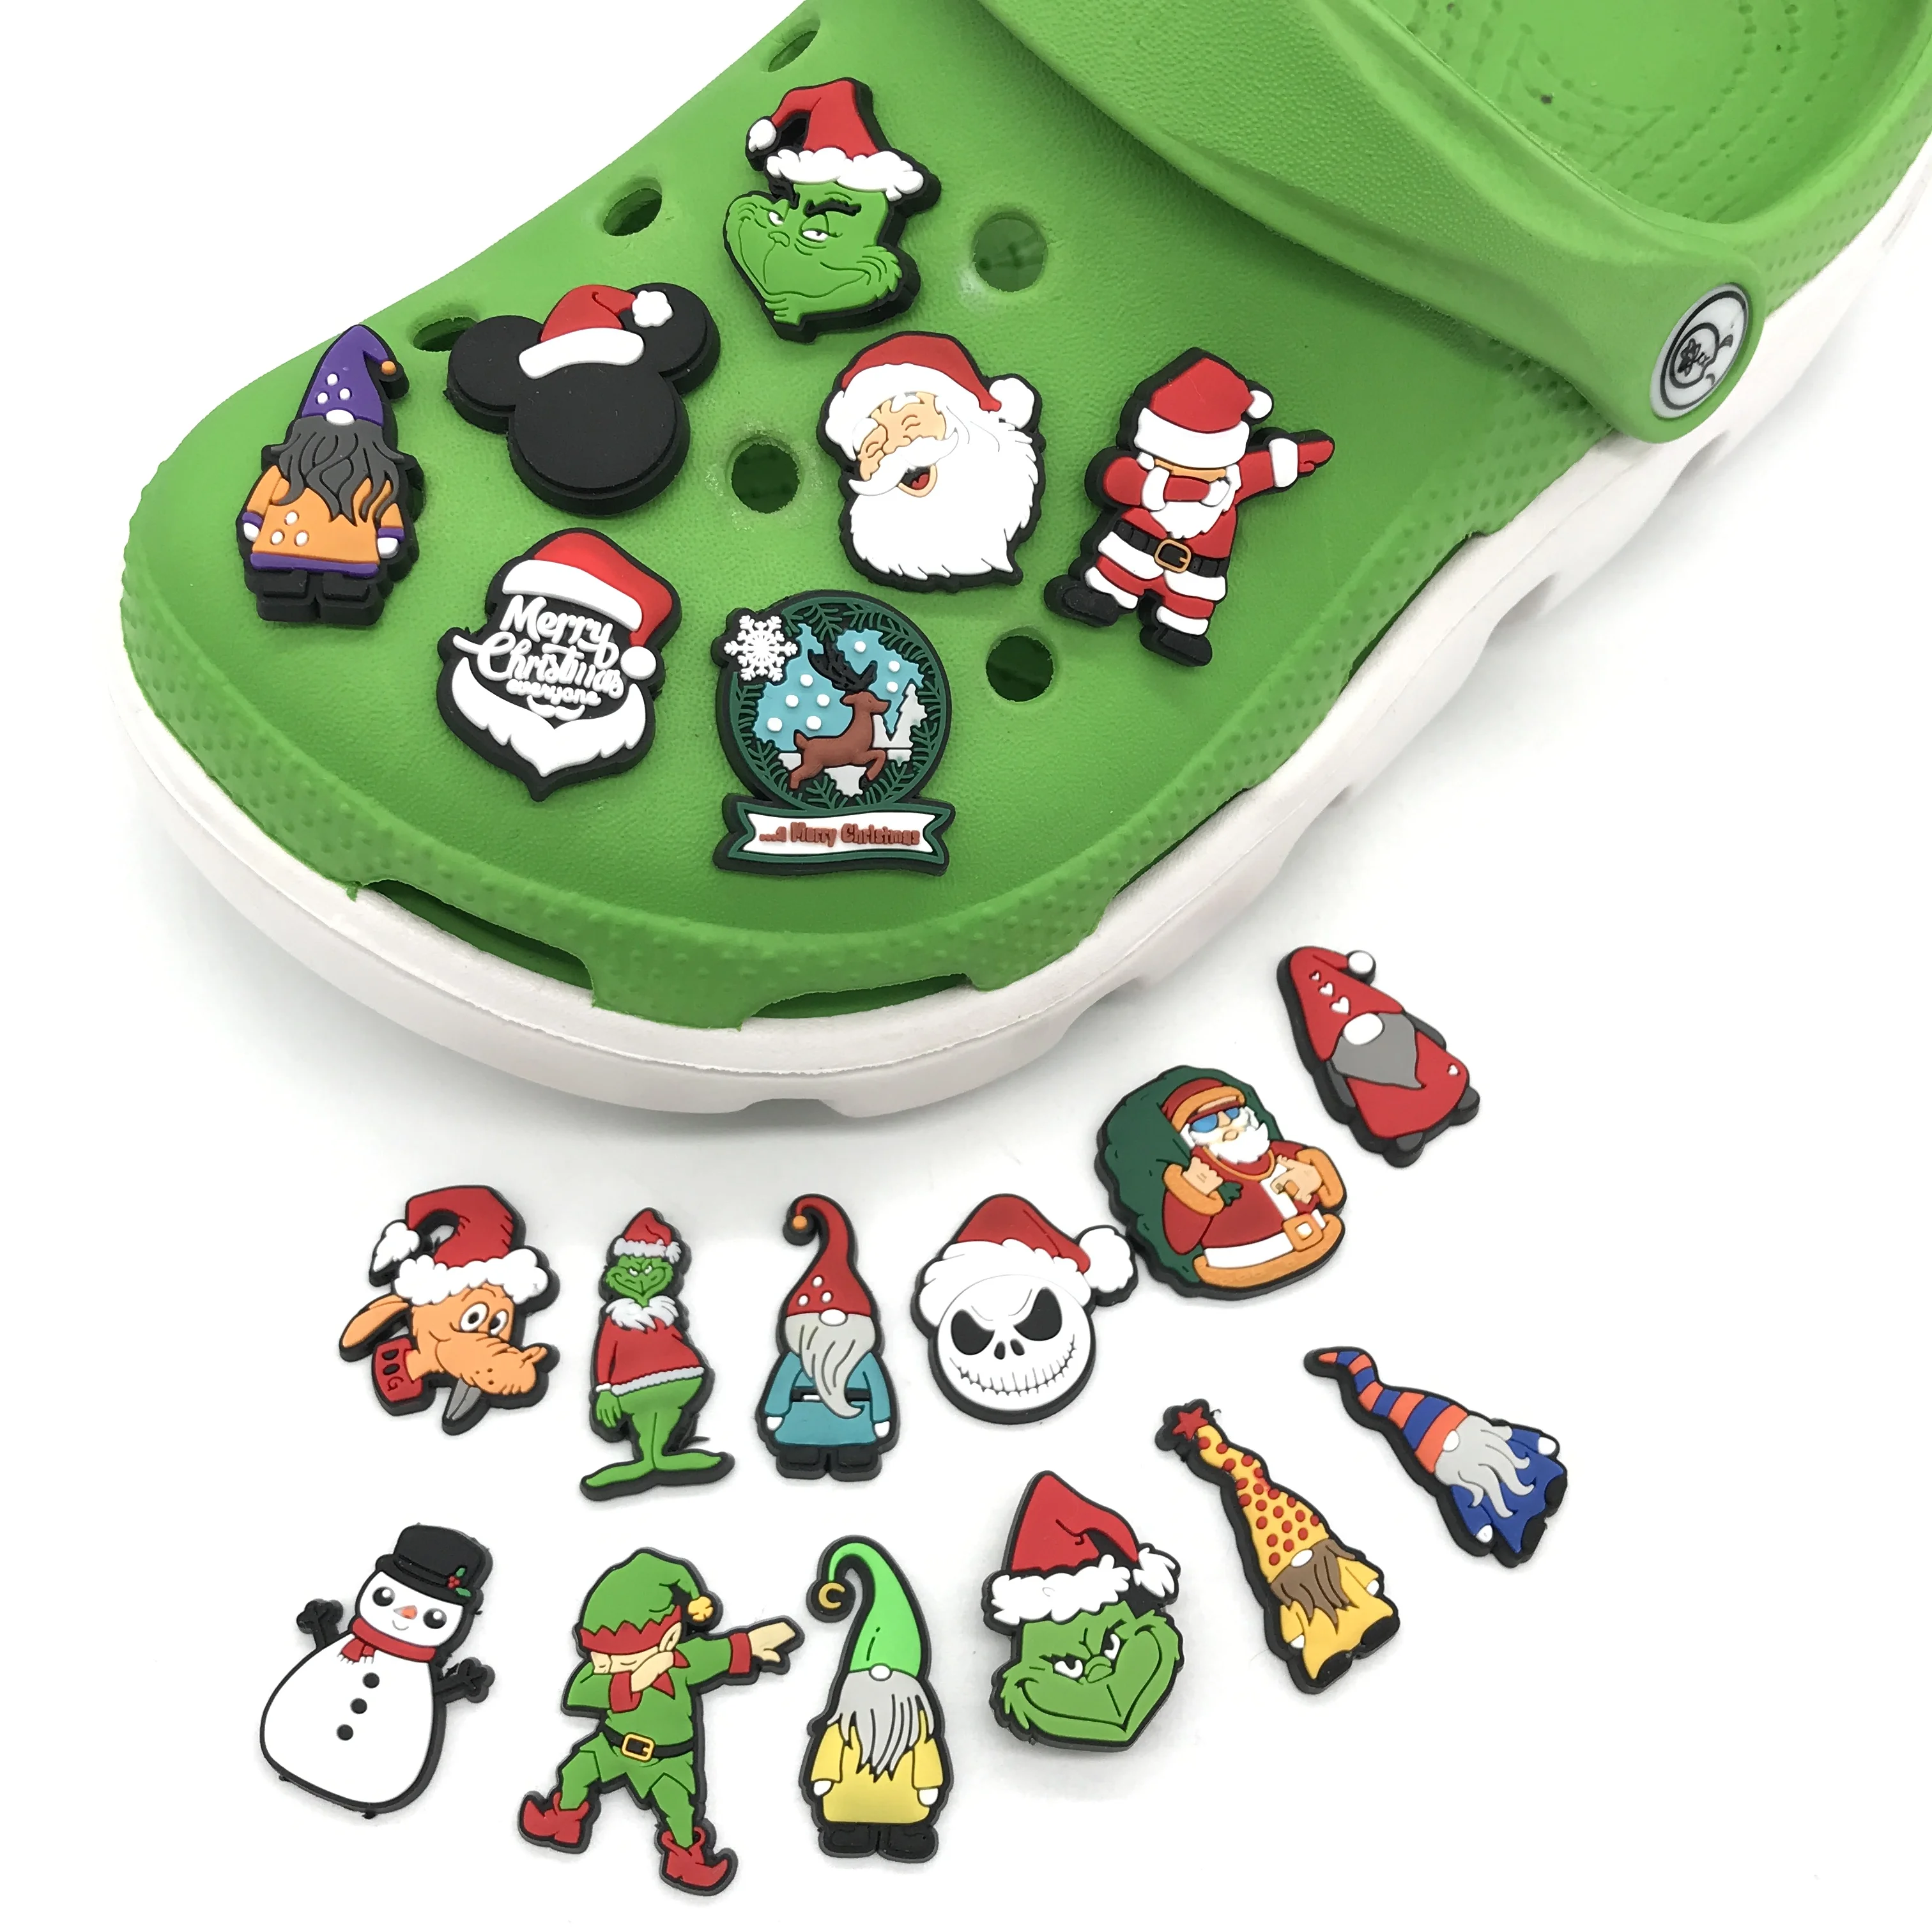 

2021 new design merry christmas present Santa snowman grinch party gifts lucky shoes charms shoe decorations clog charms, Picture